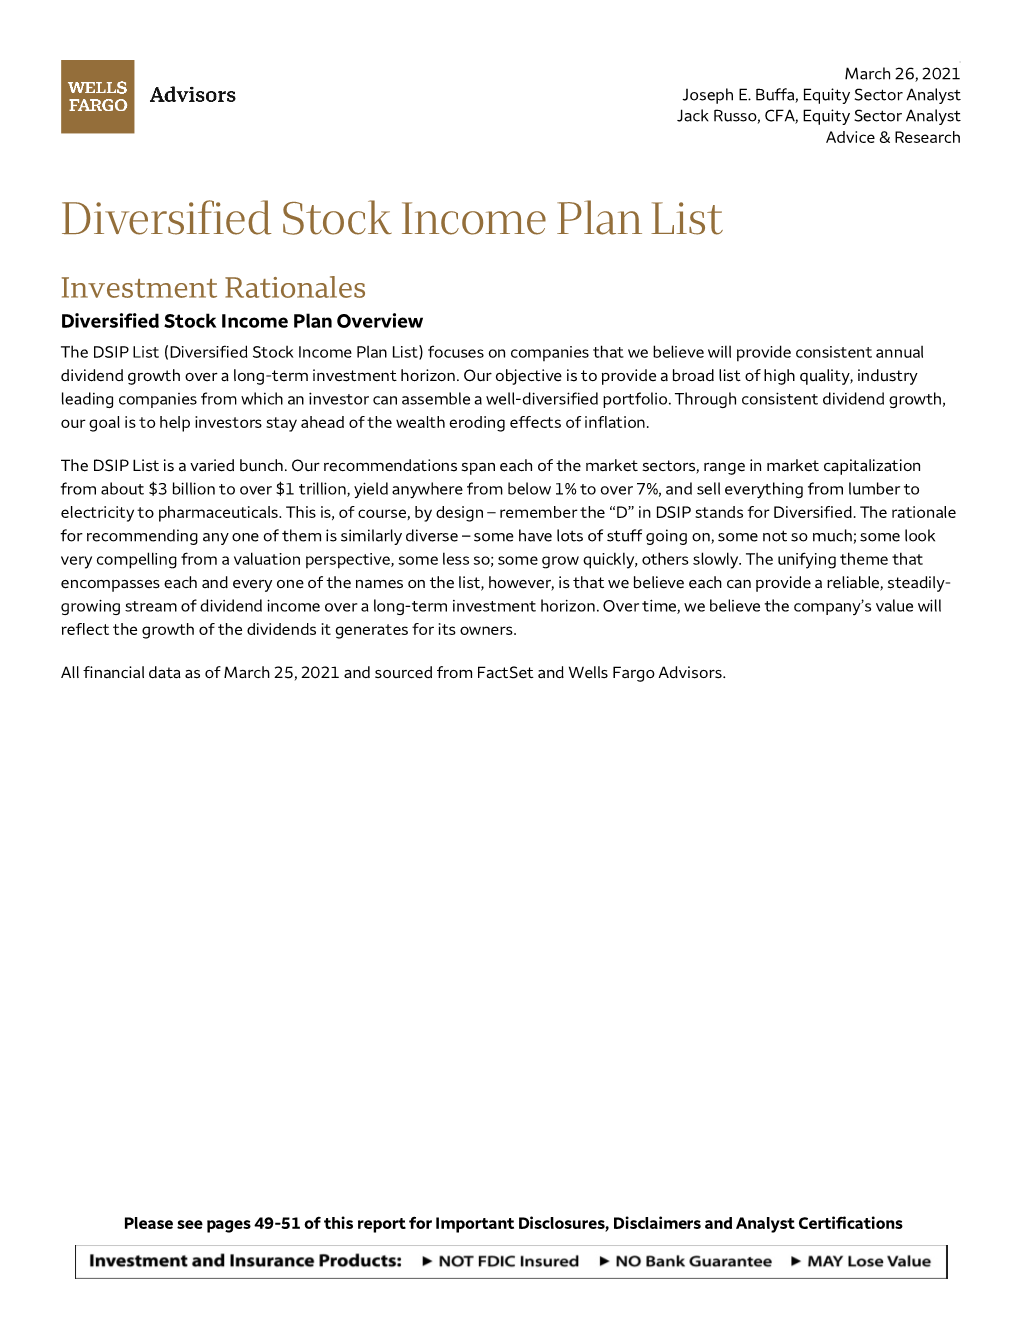 Diversified Stock Income Plan List